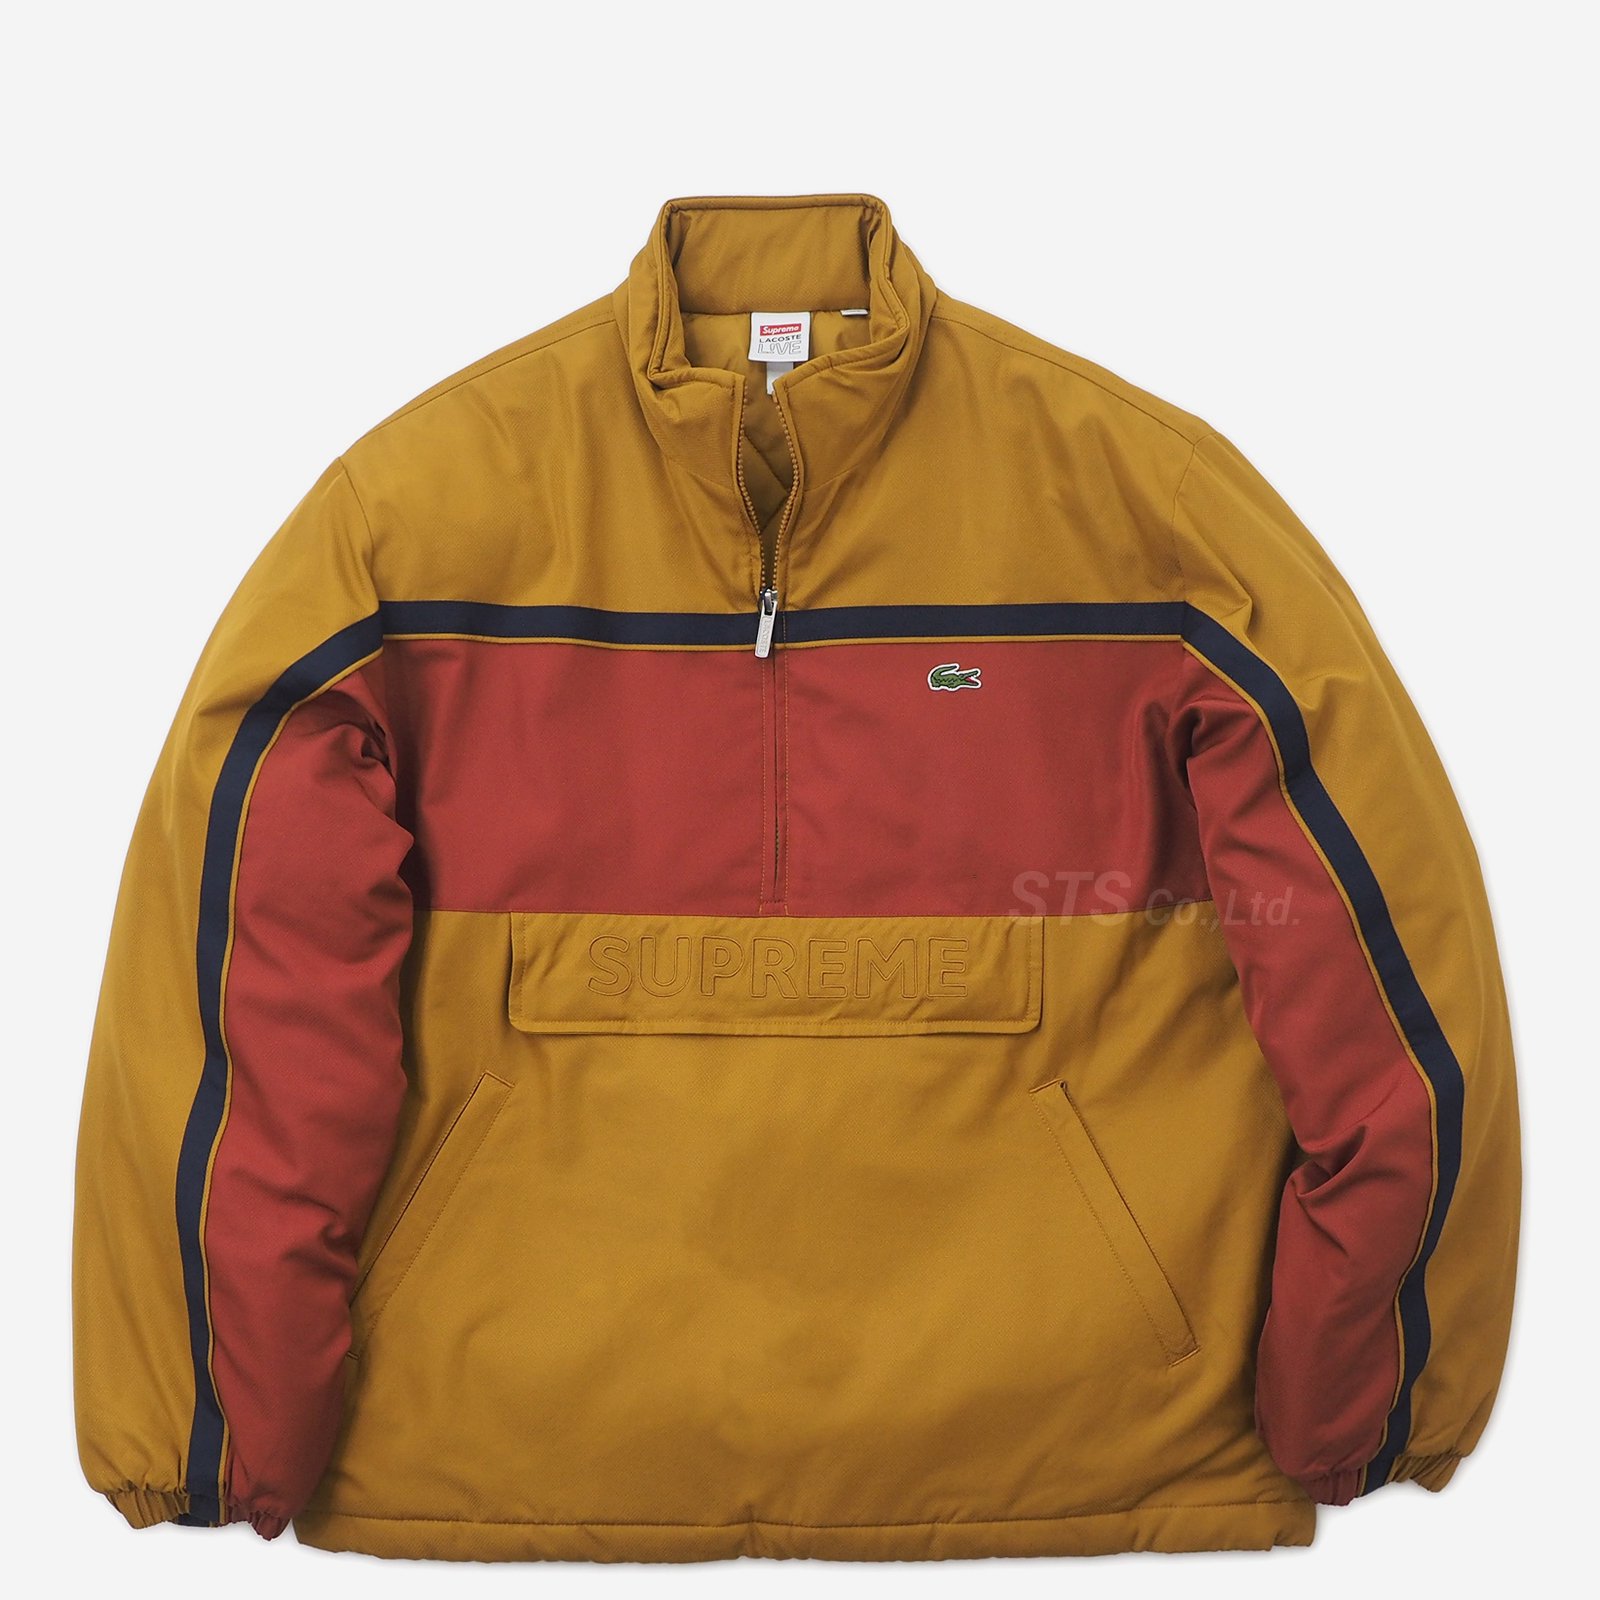 Supreme/LACOSTE Puffy Half Zip Pullover - ParkSIDER